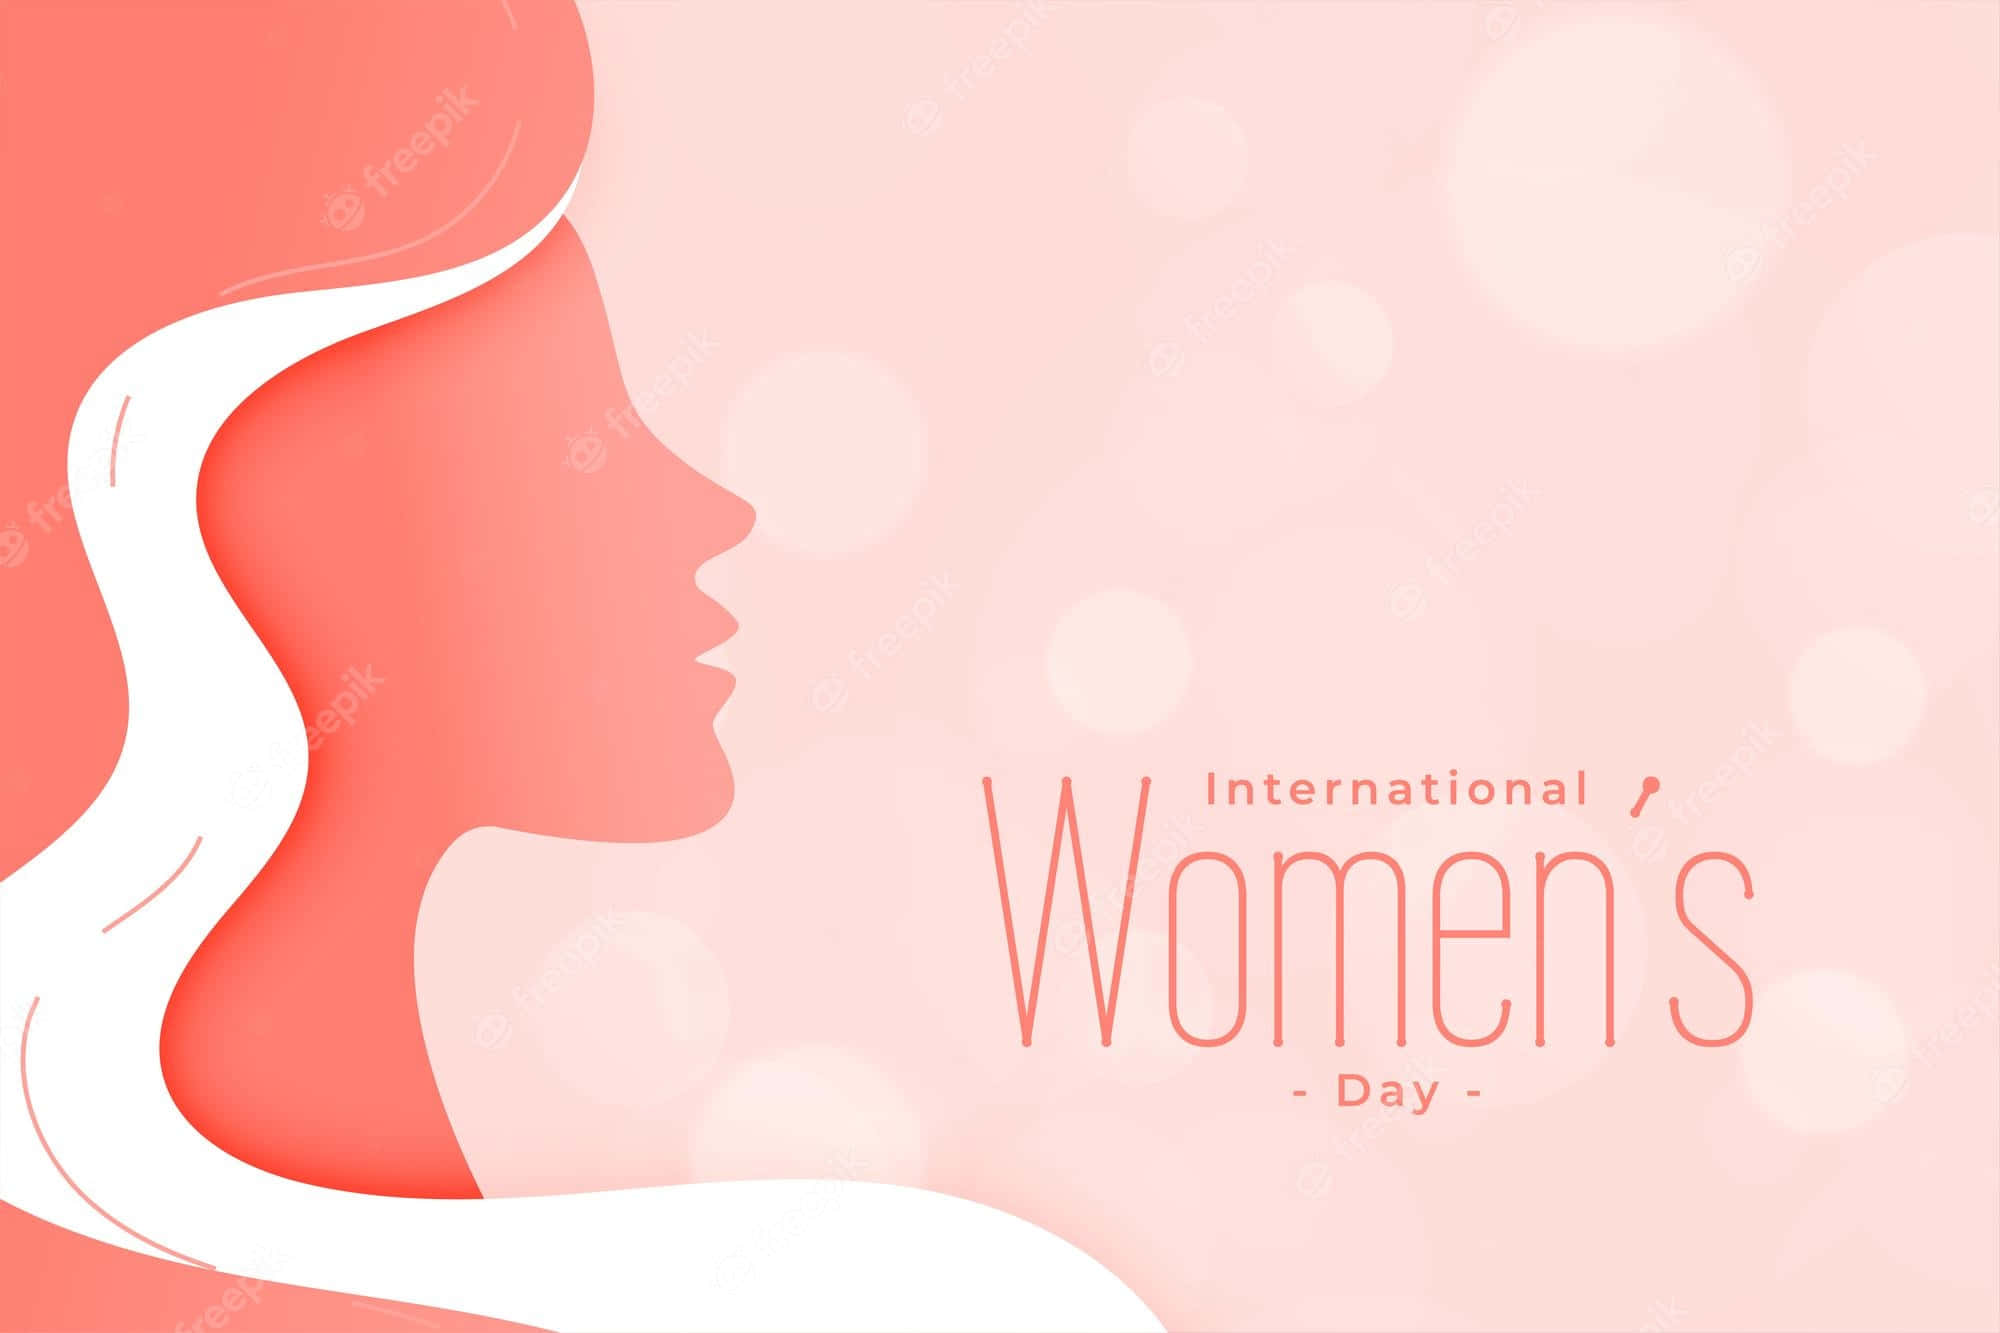 International Women's Day Background With A Woman's Silhouette